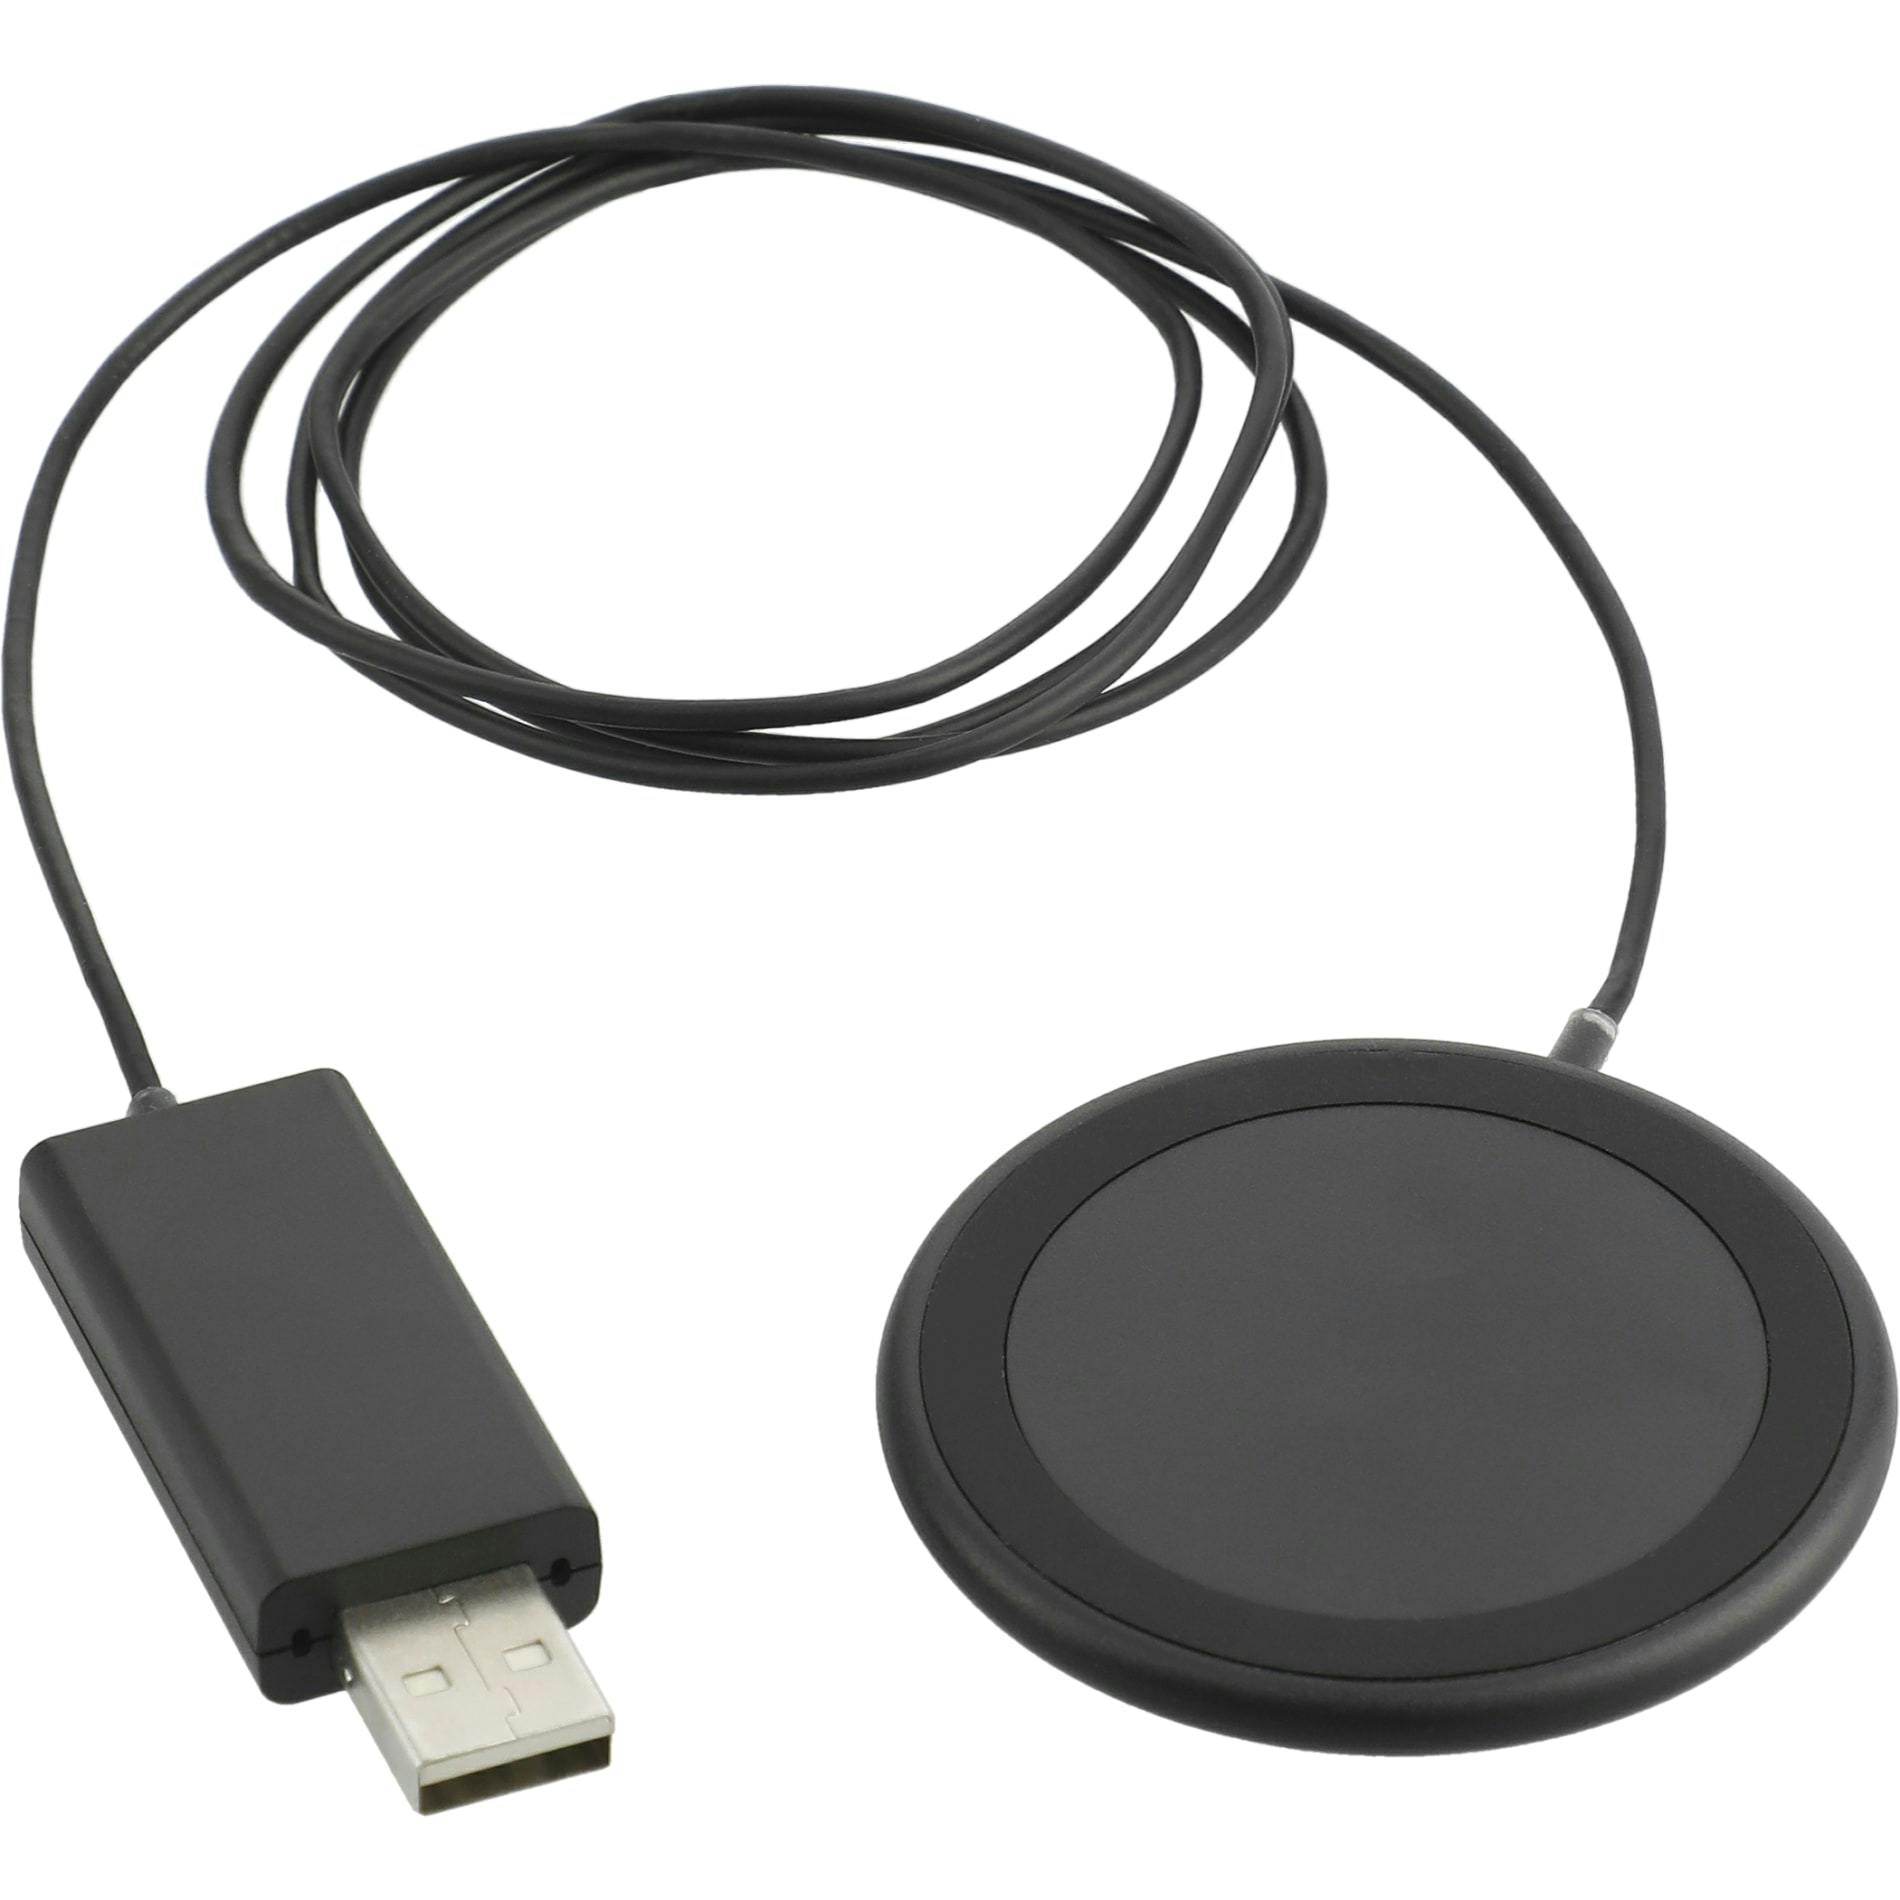 MagClick® Fast Wireless Charging Pad - additional Image 3